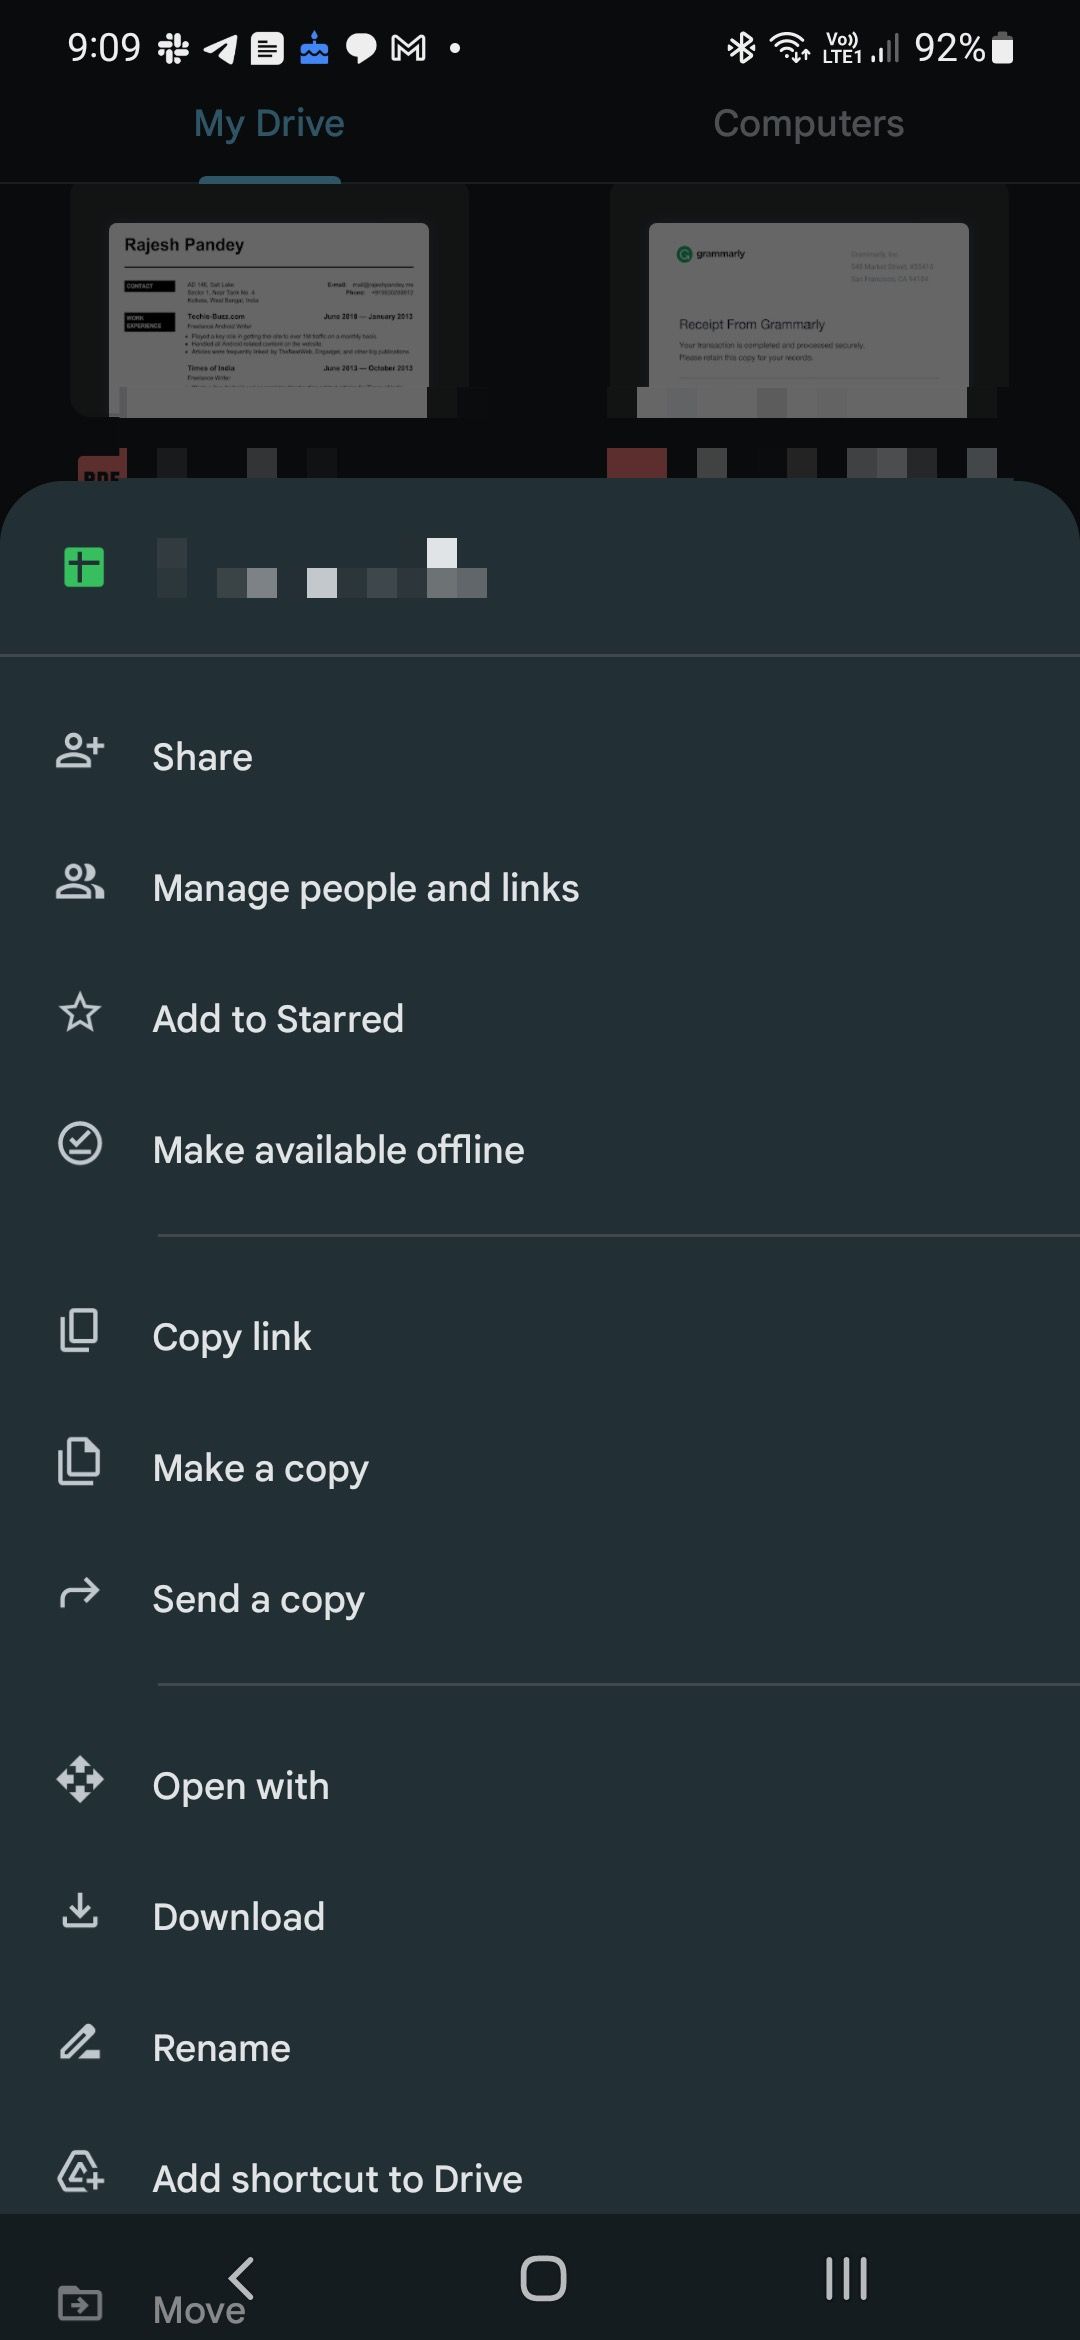 A mobile screenshot of Google Drive's file options menu, including 'Share', 'Add to Starred', 'Make available offline', and 'Copy link', with additional actions like 'Download' and 'Rename'.